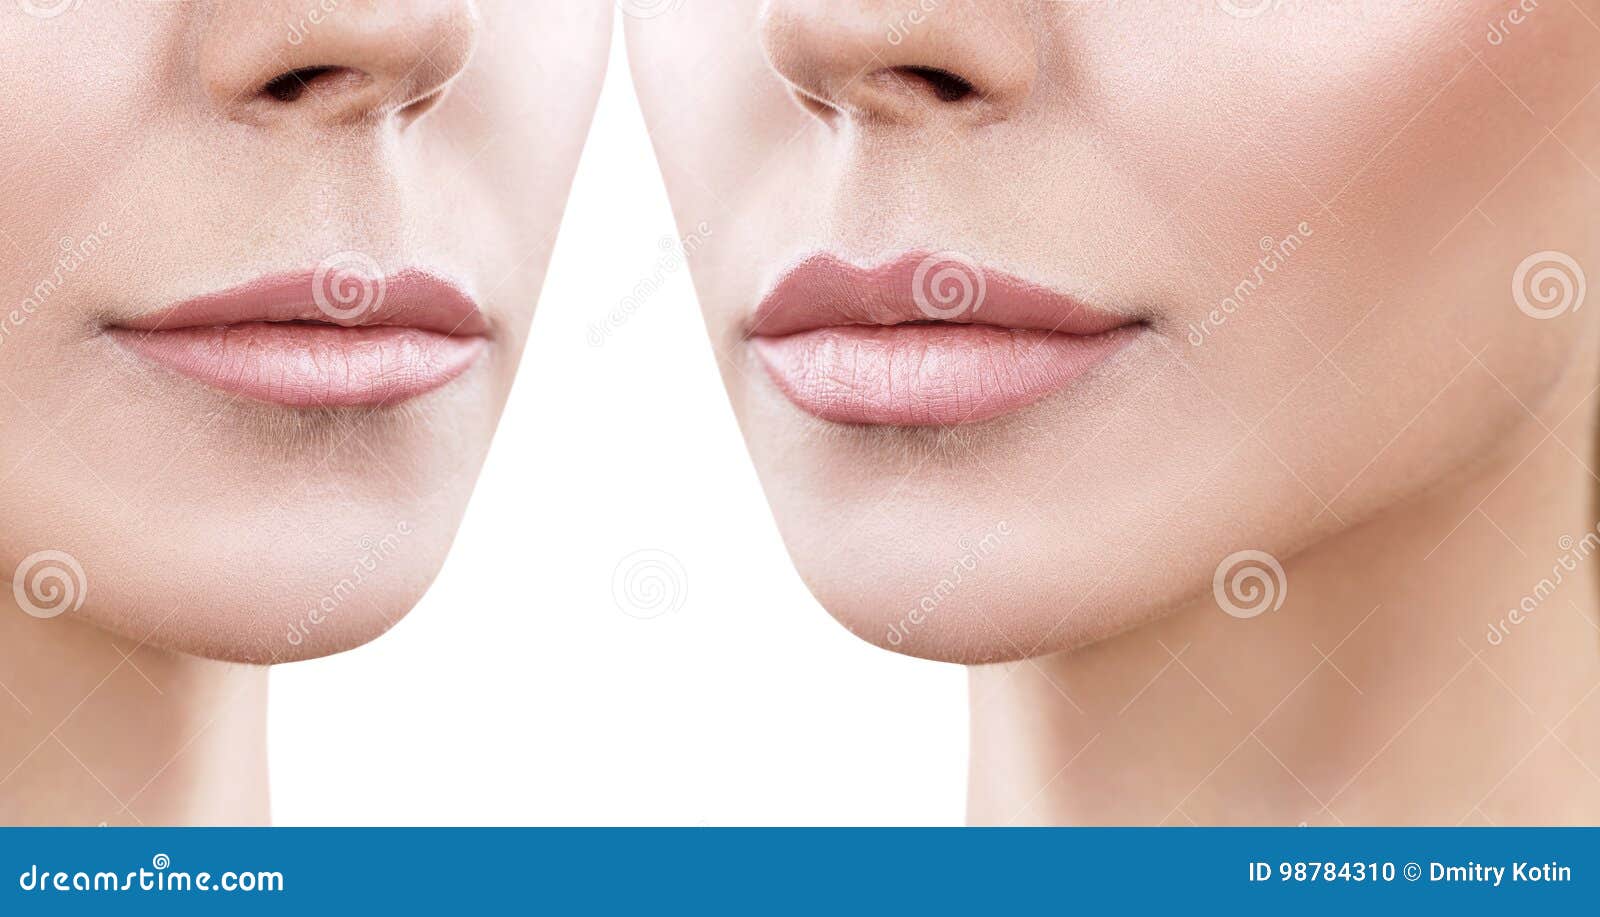 lips of adult woman before and after augmentation